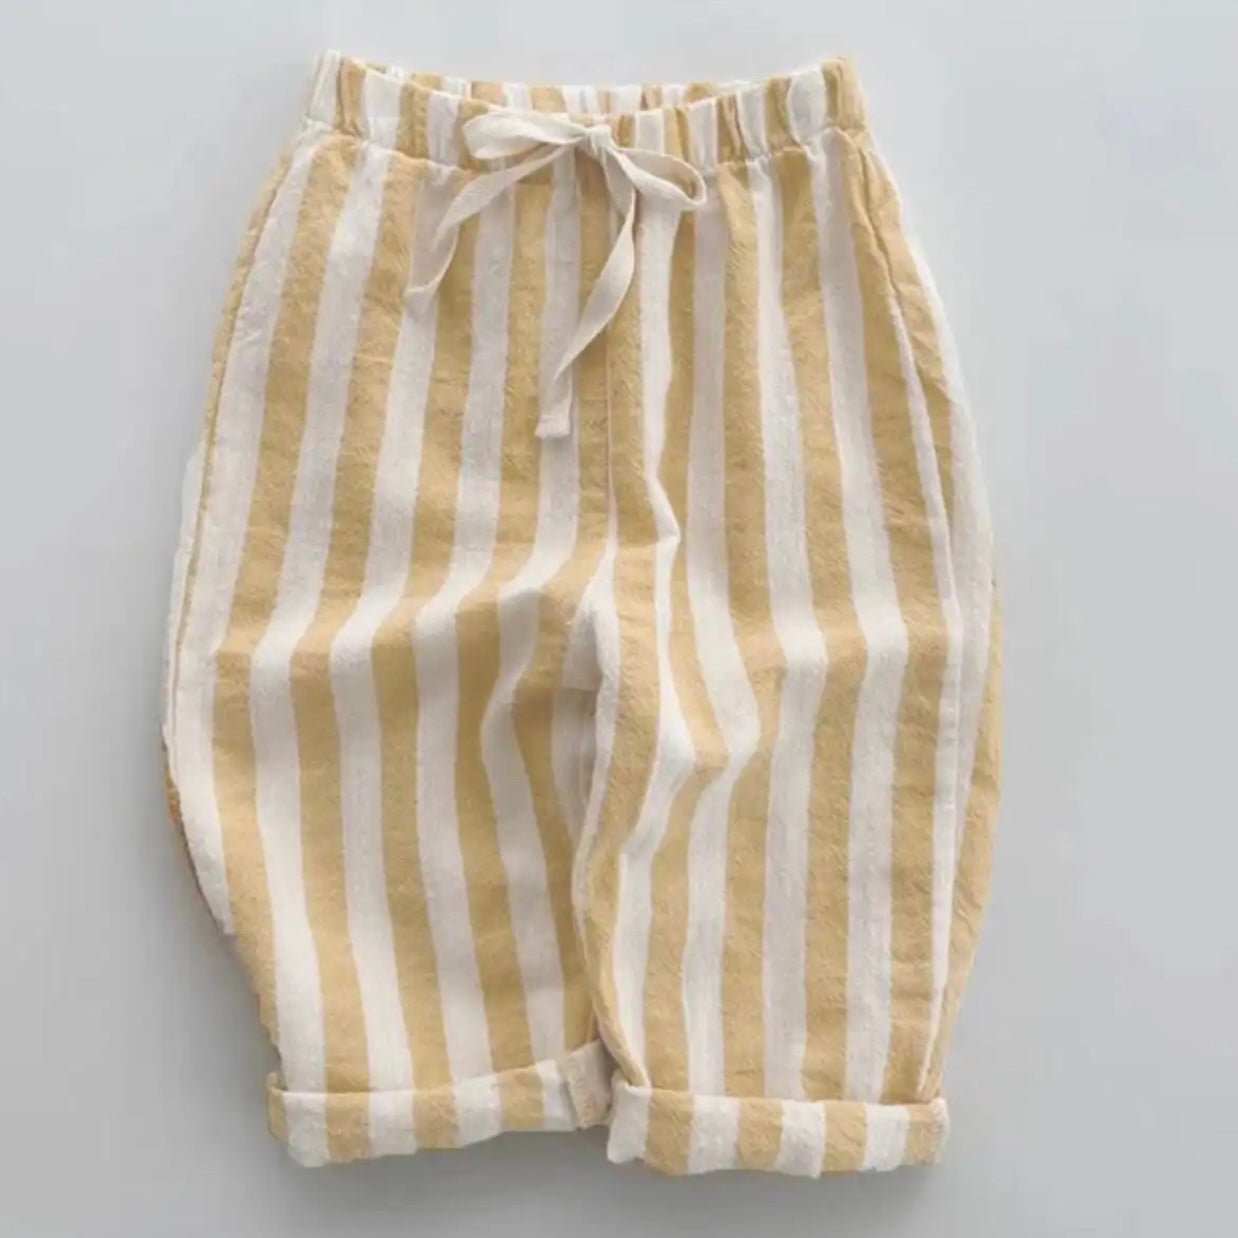 Summer Stripes Pants find Stylish Fashion for Little People- at Little Foxx Concept Store